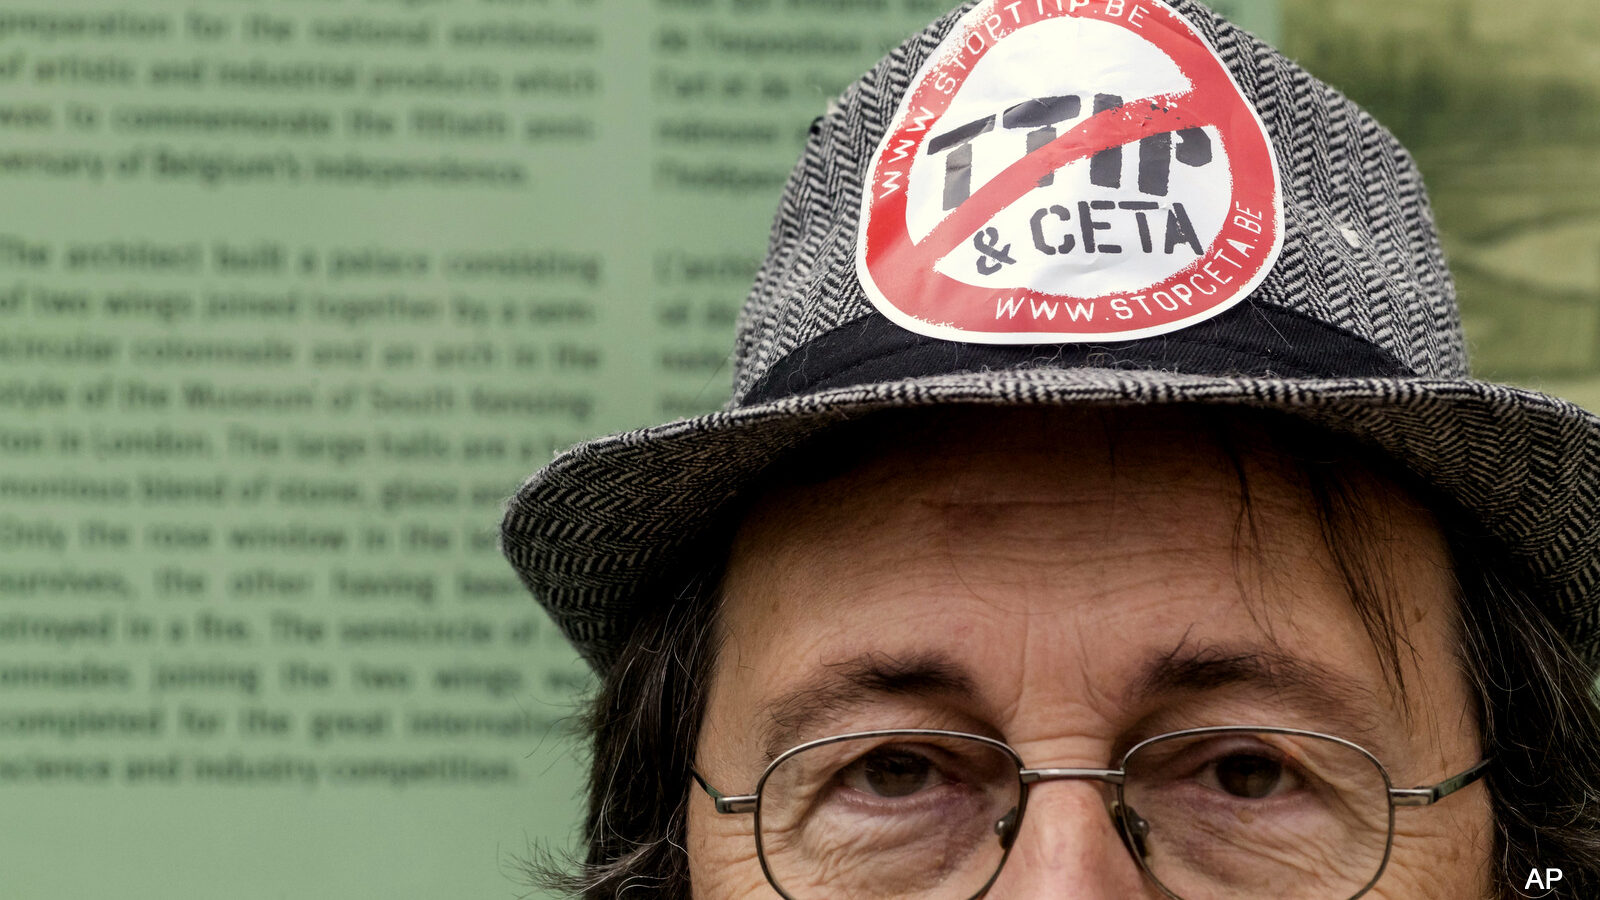 A man protests against international trade agreements TTIP and CETA in front of EU headquarters in Brussels on Thursday, Oct. 27, 2016.